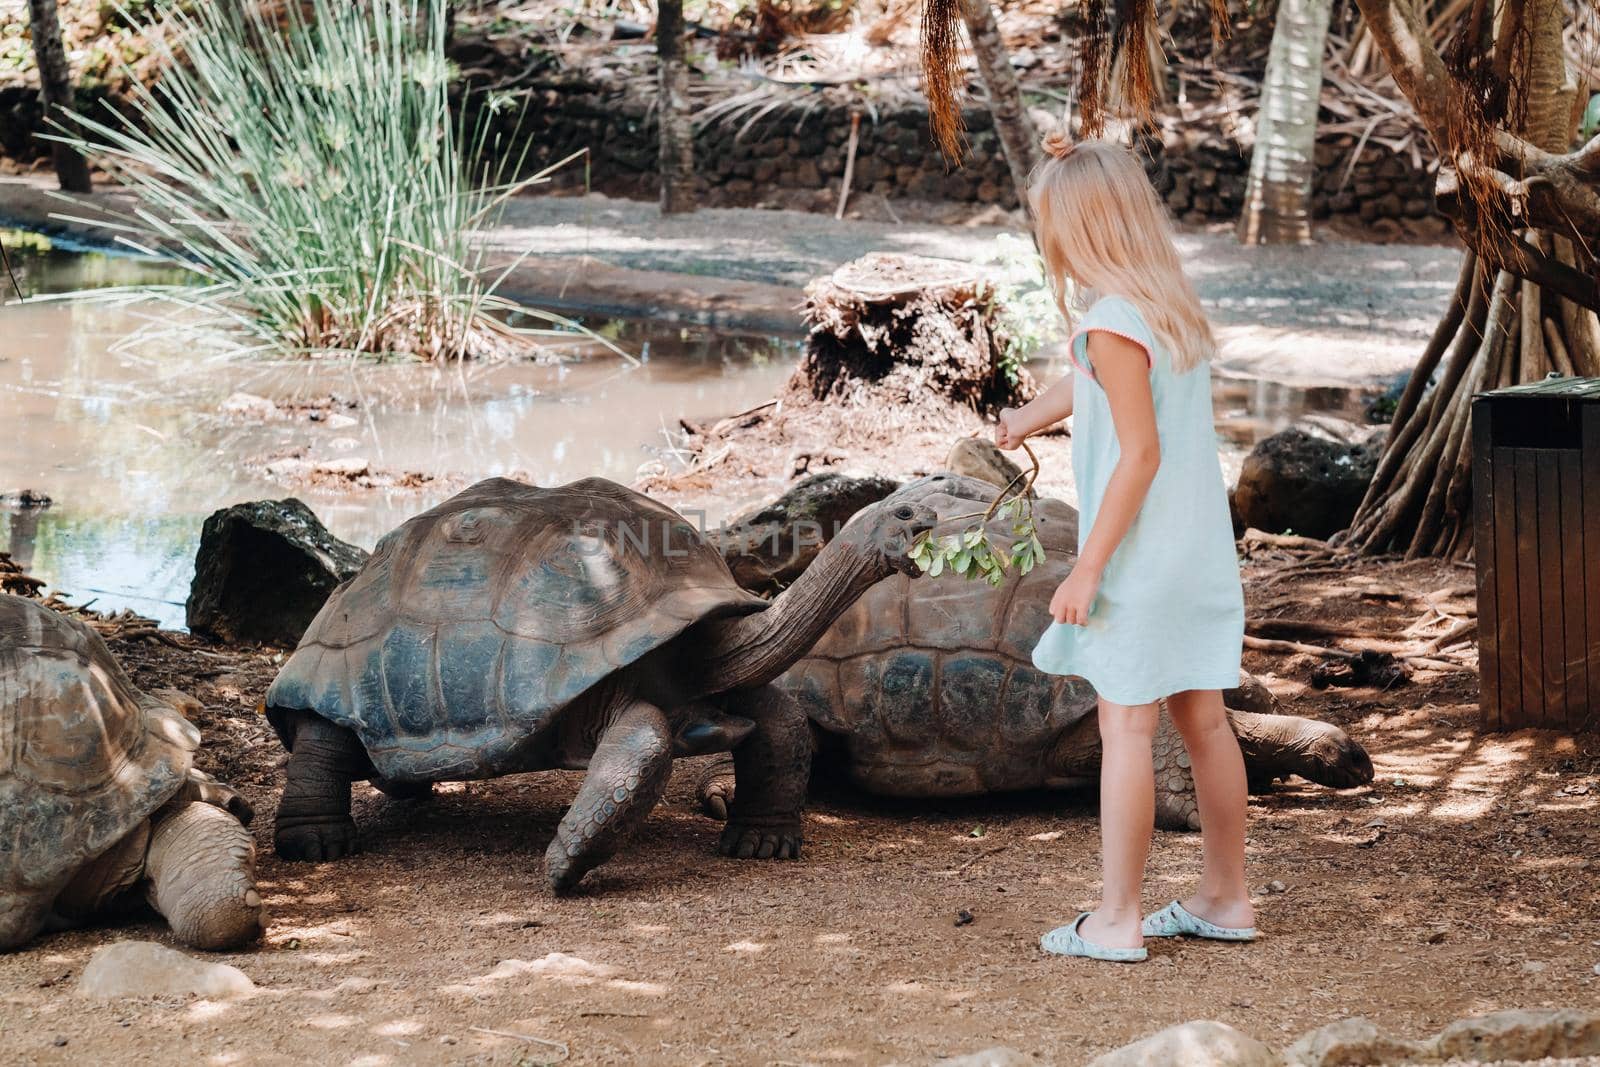 Fun family entertainment in Mauritius. A girl feeds a giant tortoise at the Mauritius island zoo by Lobachad